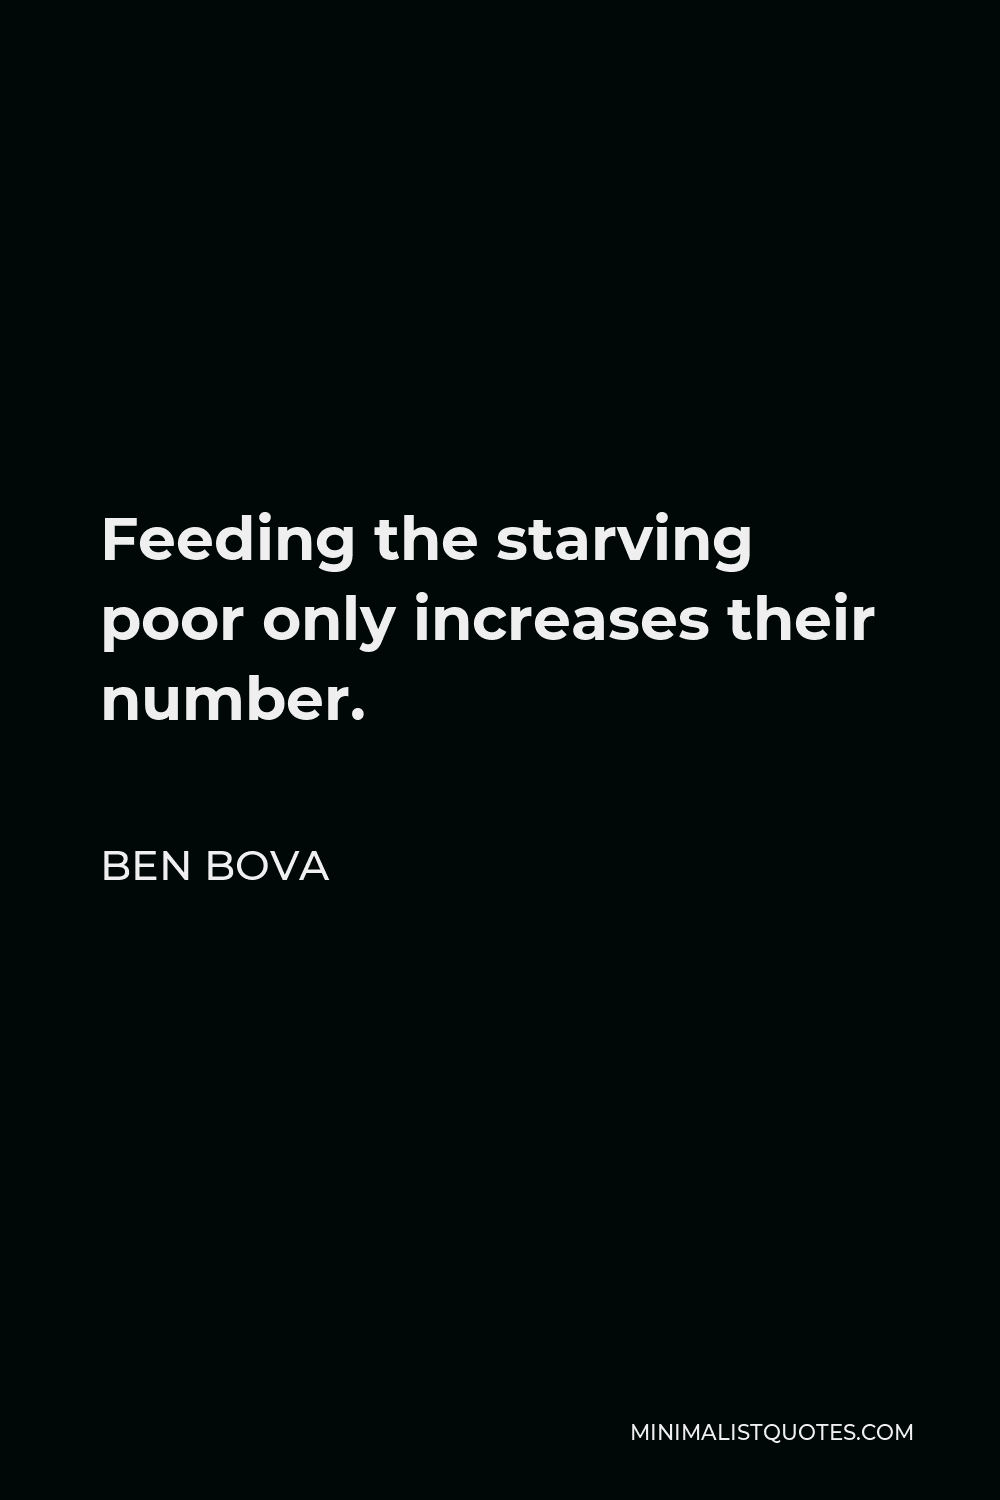 Ben Bova Quote - Feeding the starving poor only increases their number.